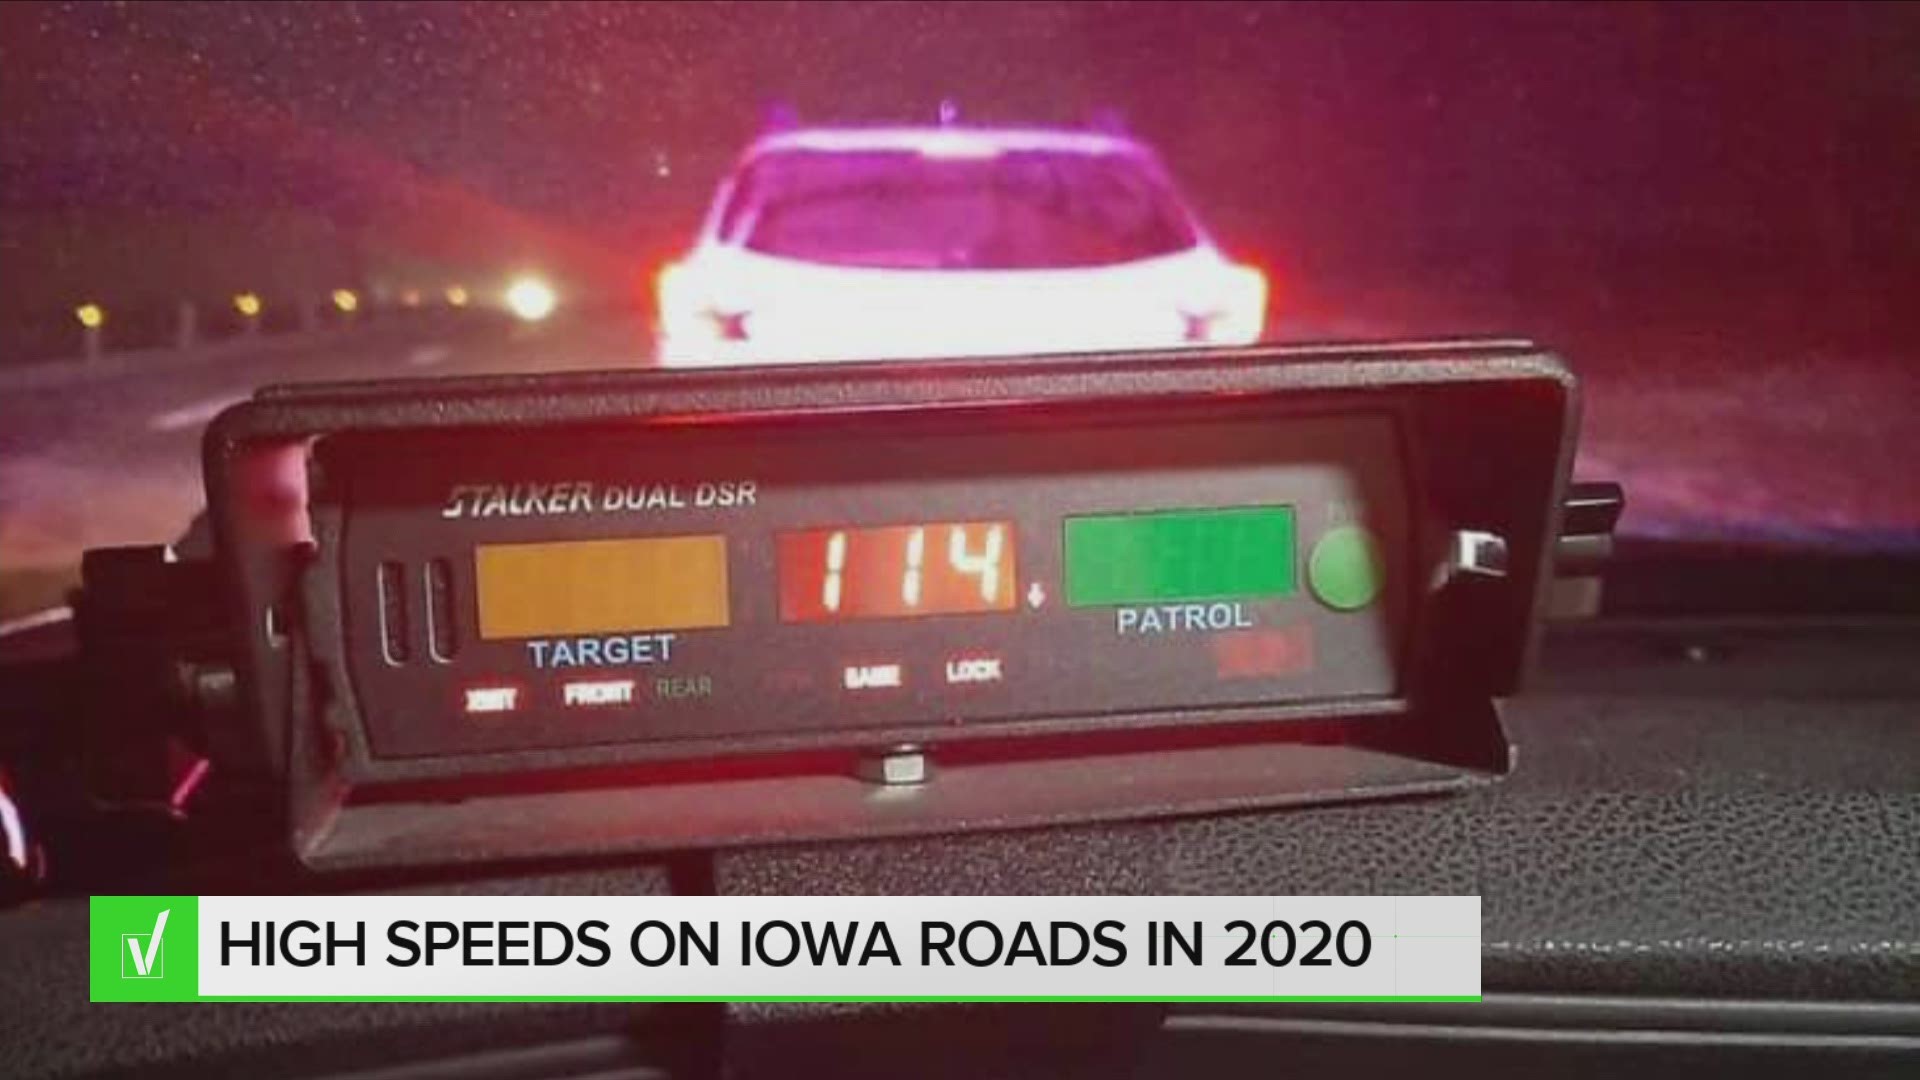 Iowa State Patrol says drivers cited being late for work and not realizing how fast they were going as excuses for speeding.